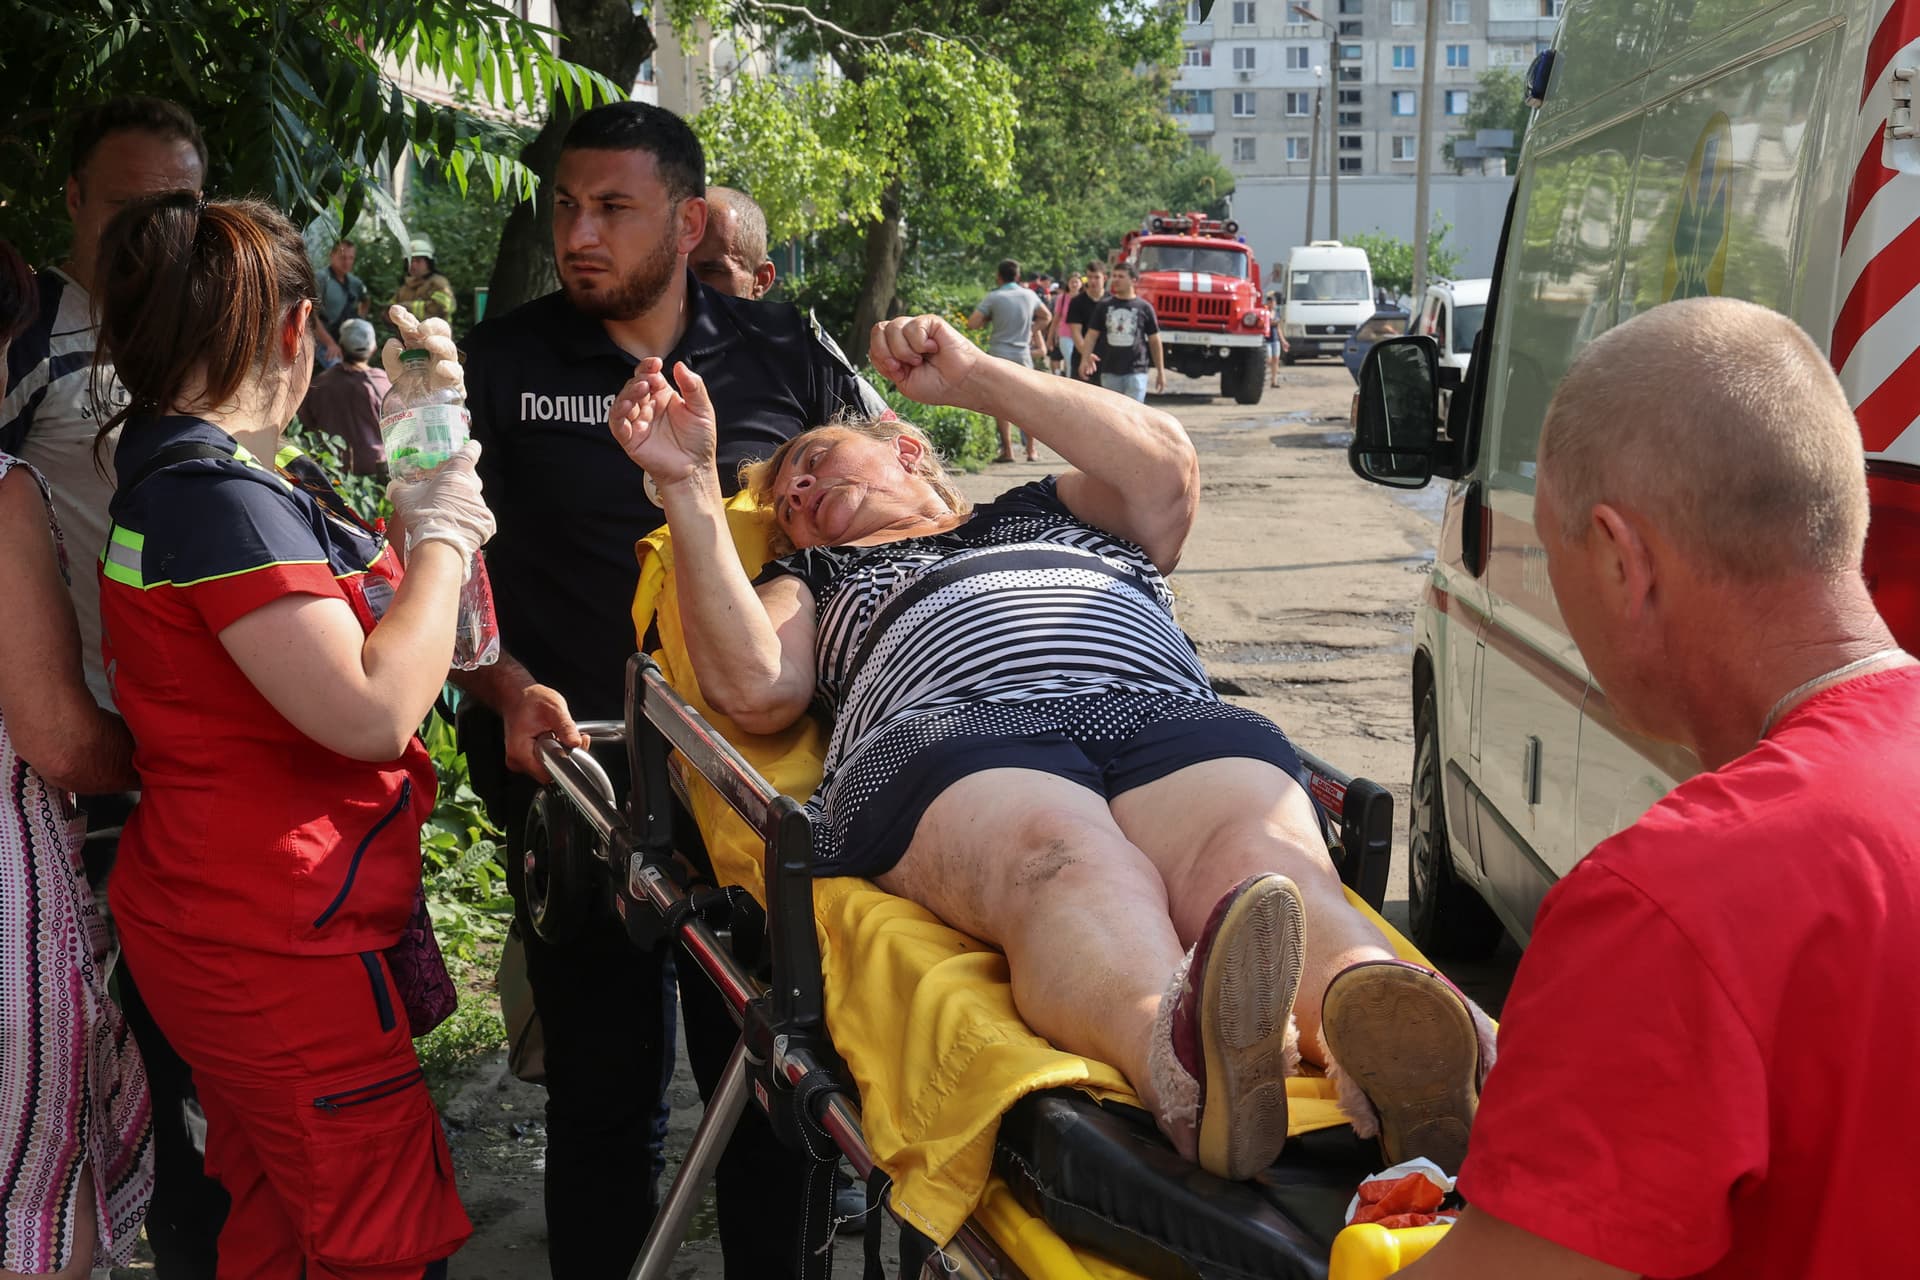 An injured woman is taken away on a stretcher by paramedics in the town of Pervomaiskyi